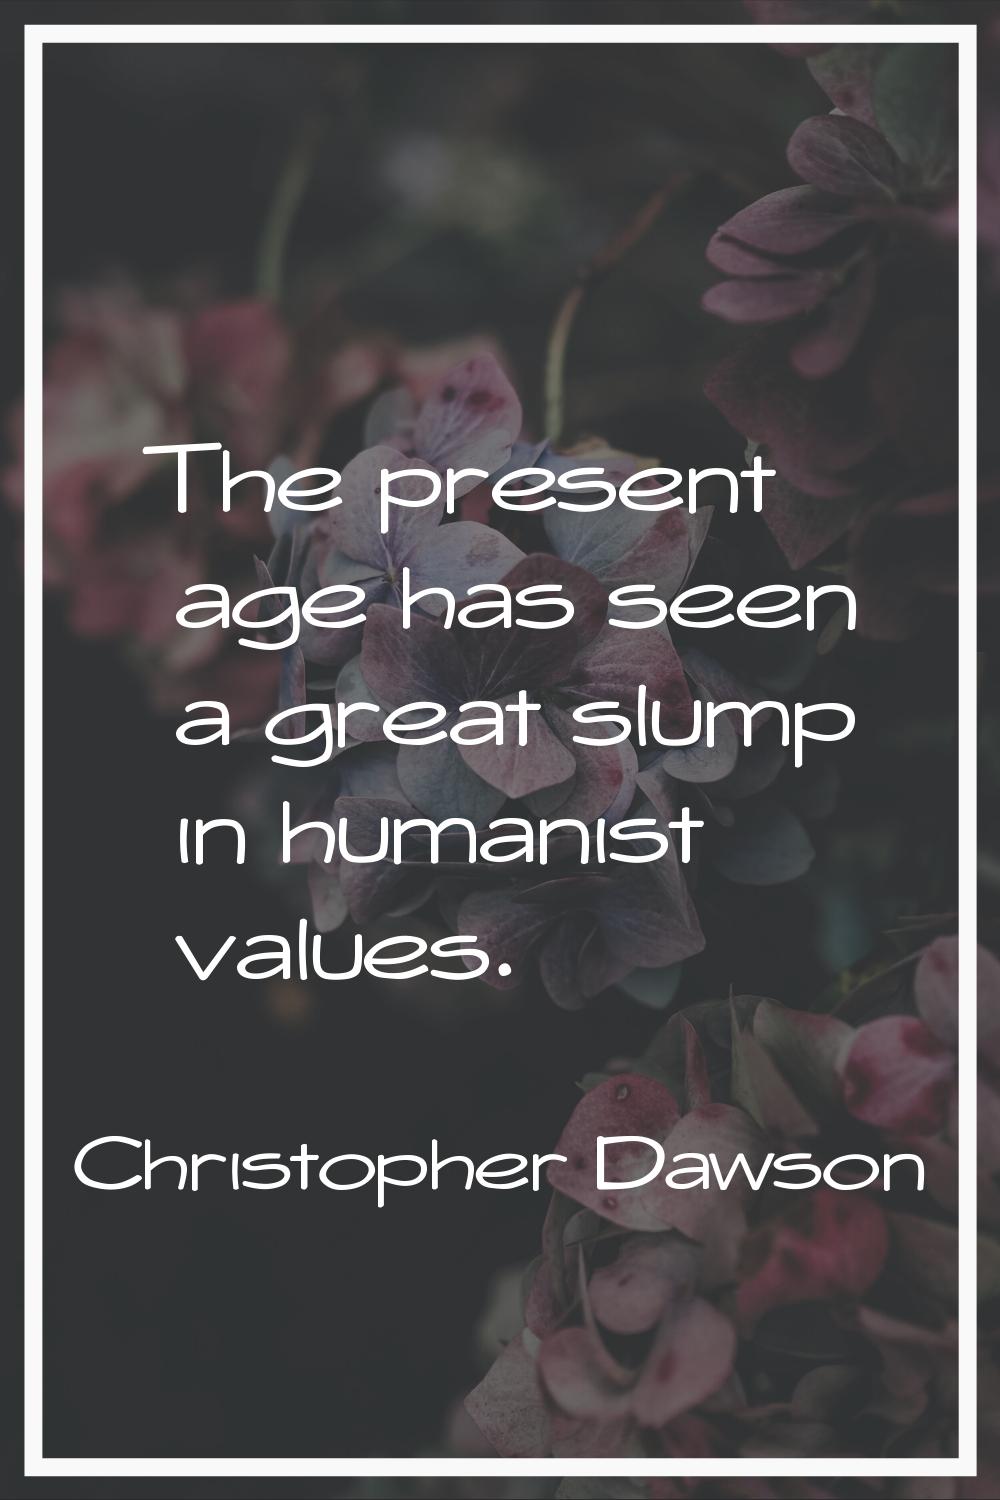 The present age has seen a great slump in humanist values.